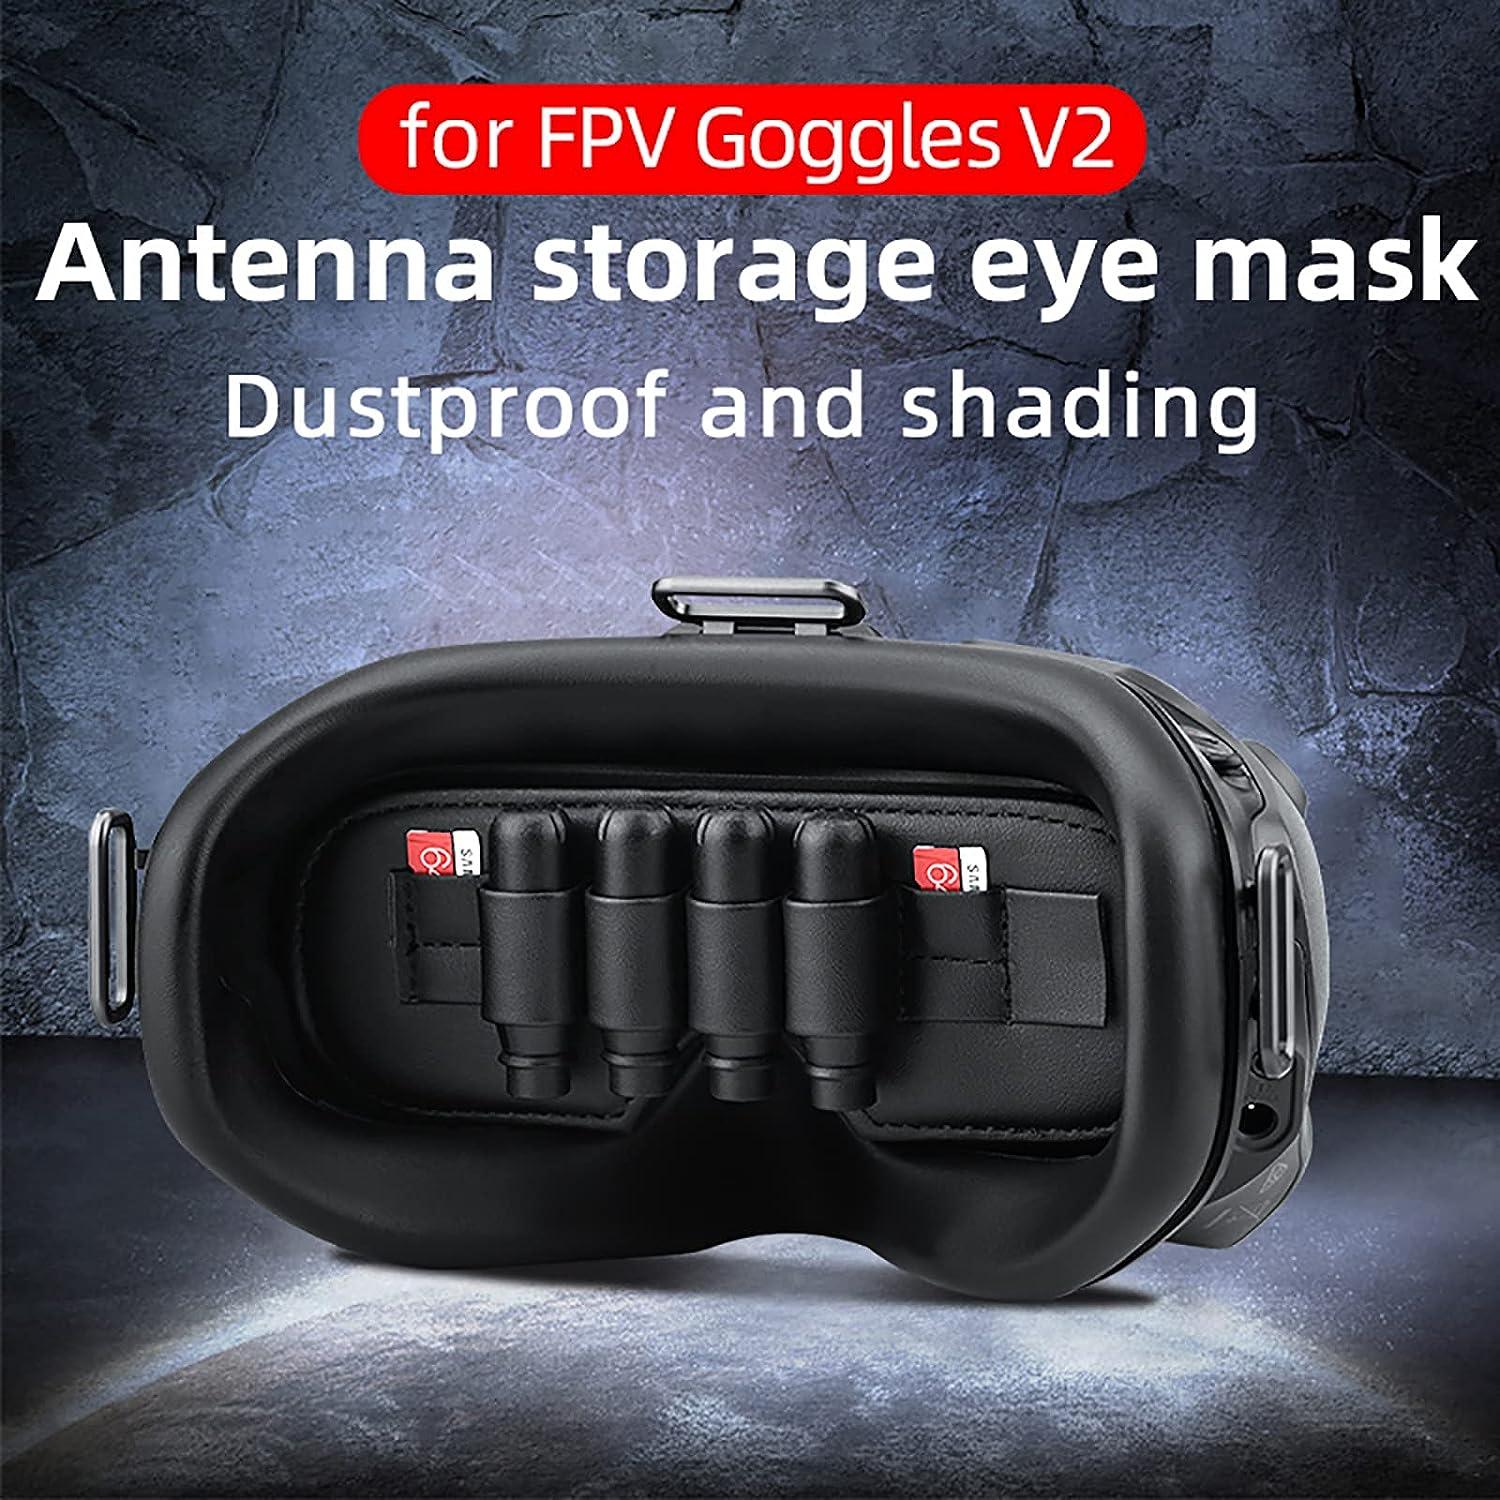 3-in-1 Dustproof And Shading Storage Mat For Fpv Digital Googles